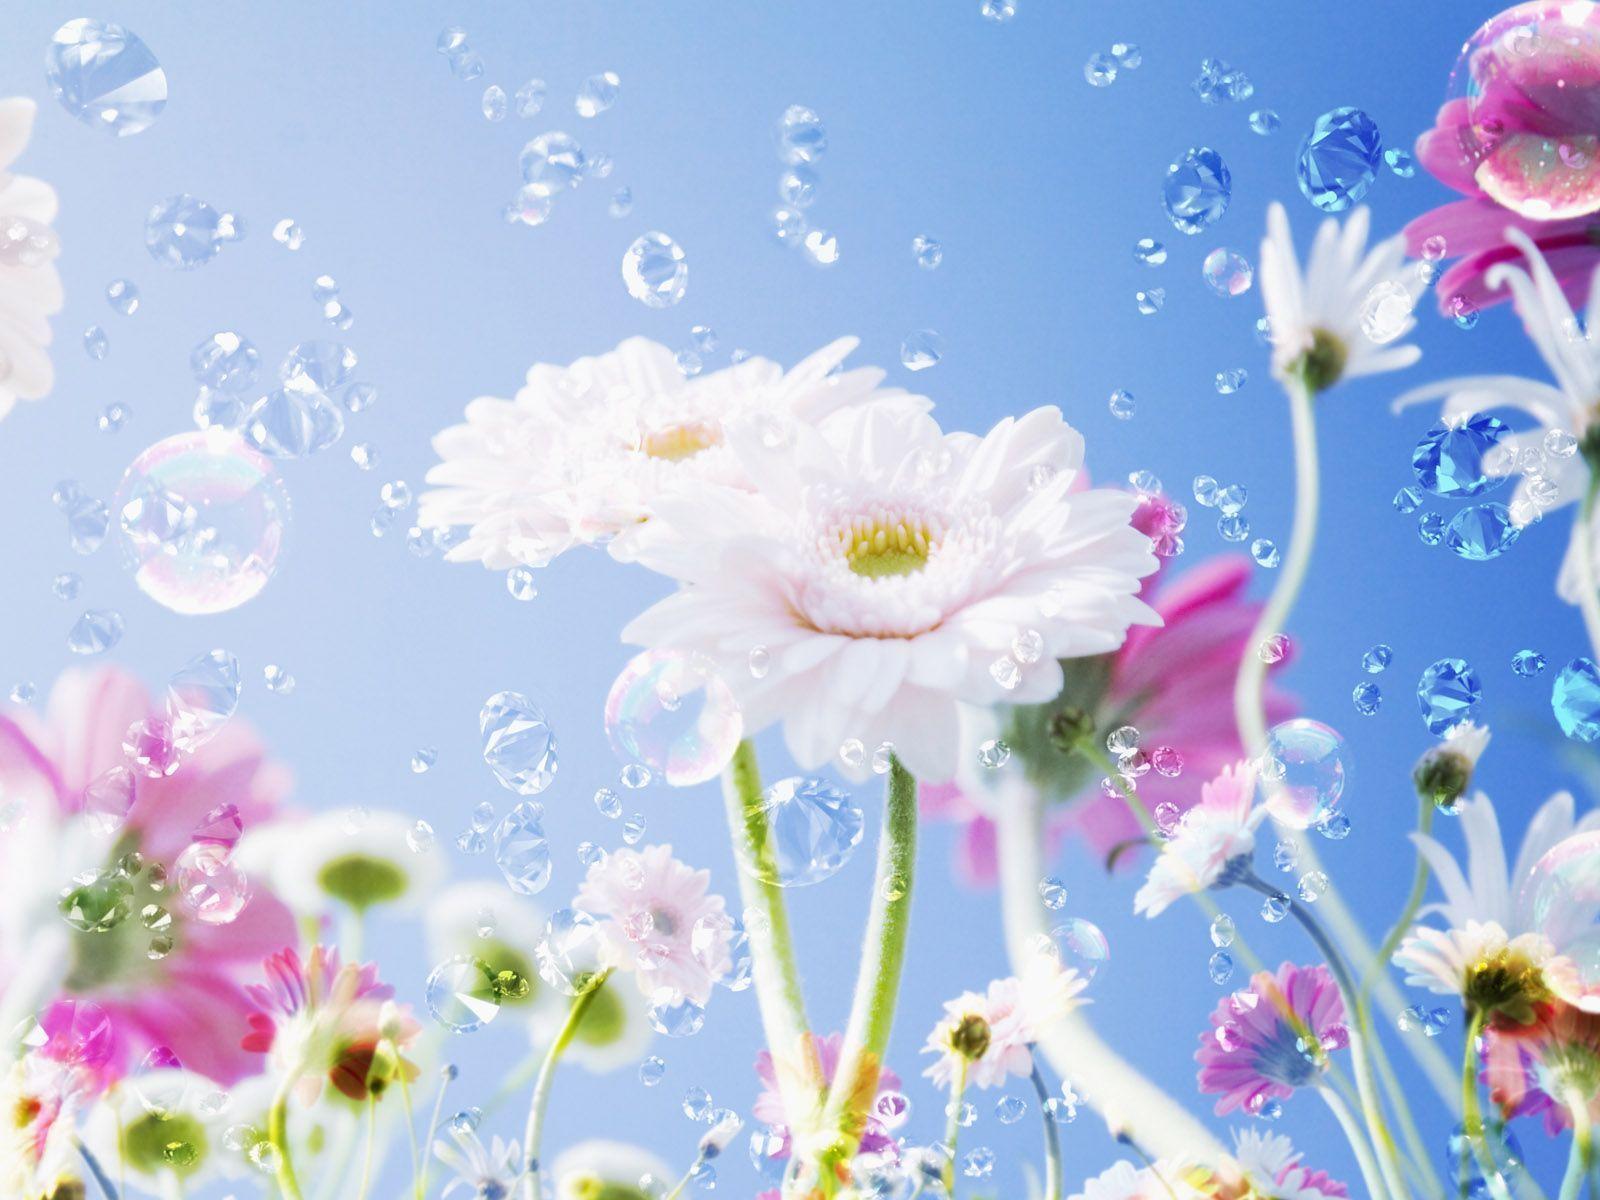 Beautiful And Attractive Flowers Wallpaper For DesktopPhotography